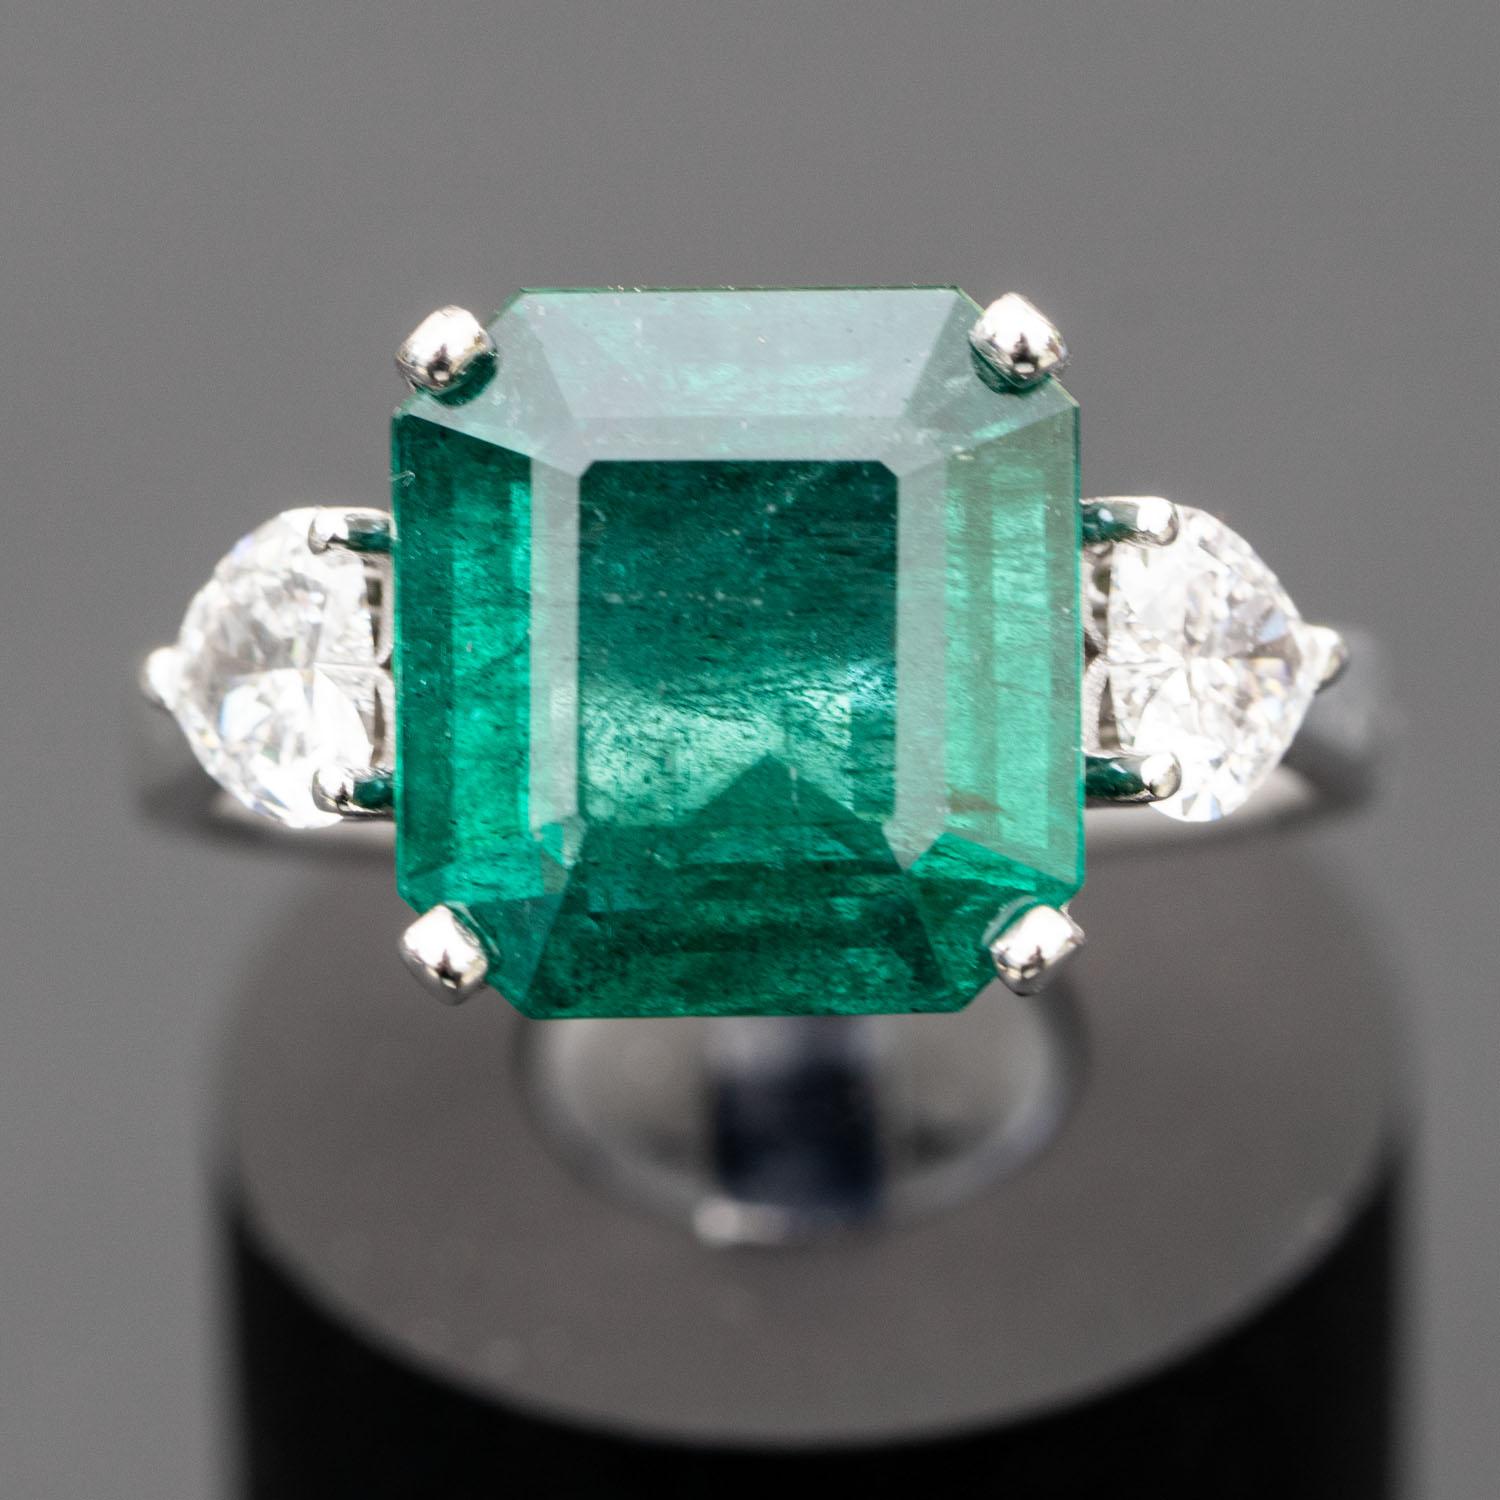 This gorgeous green emerald ring will impress everyone around you. It features a large emerald 5.10  carat top green emerald, adorned with 0.65 carat natural heart diamonds.

Natural Emerald Beryl
Shape and cutting style : Emerald
Measurements: 10mm